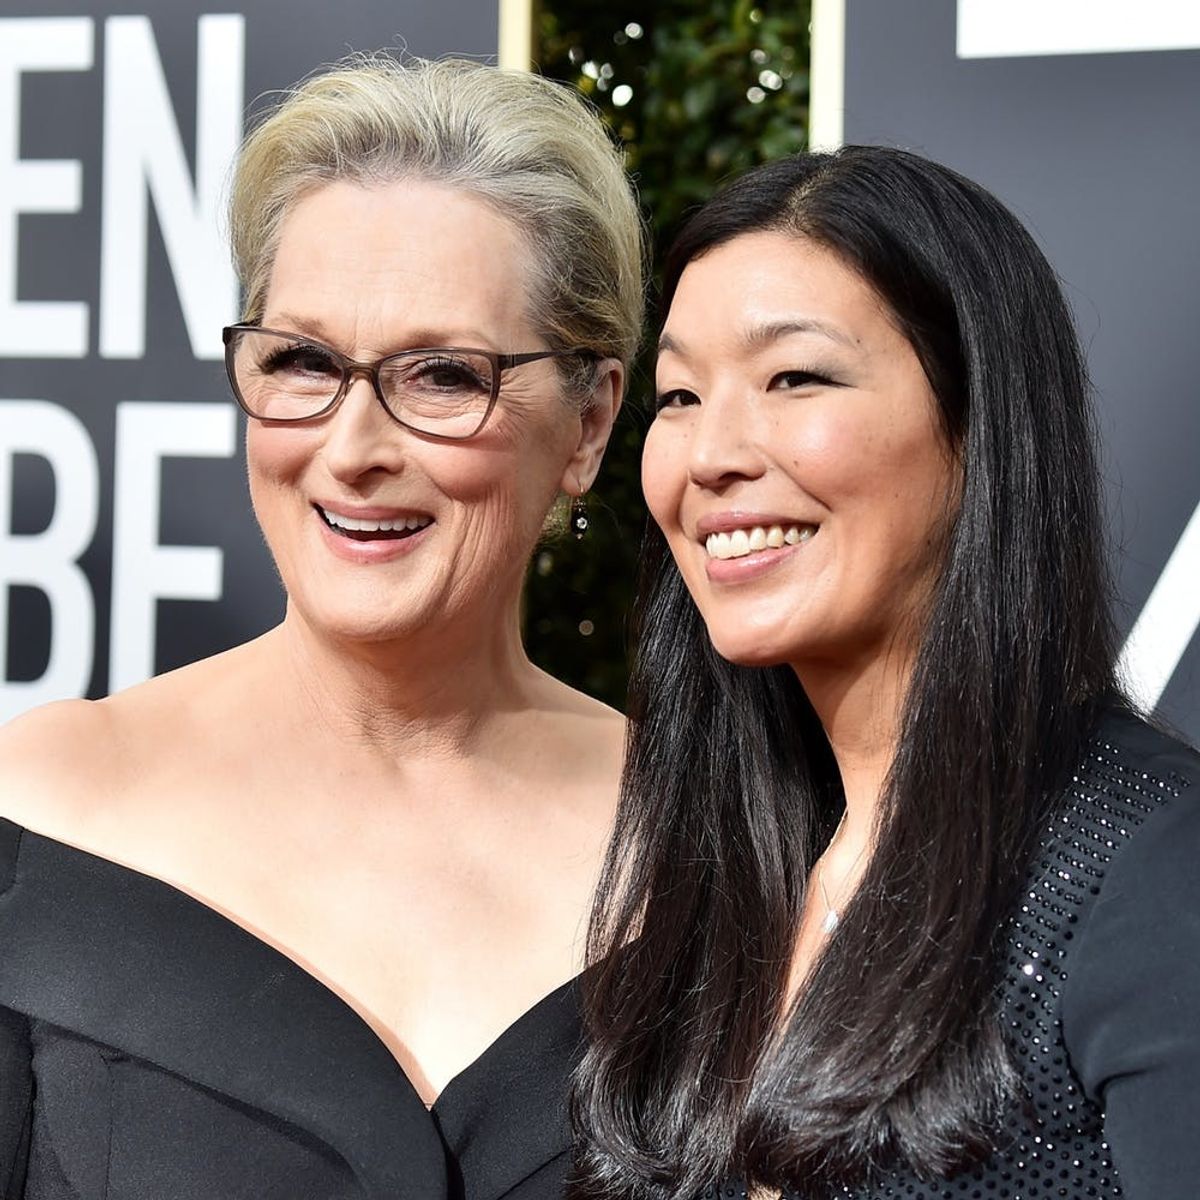 The Most Powerful Quotes About #TimesUp on the Golden Globes Red Carpet